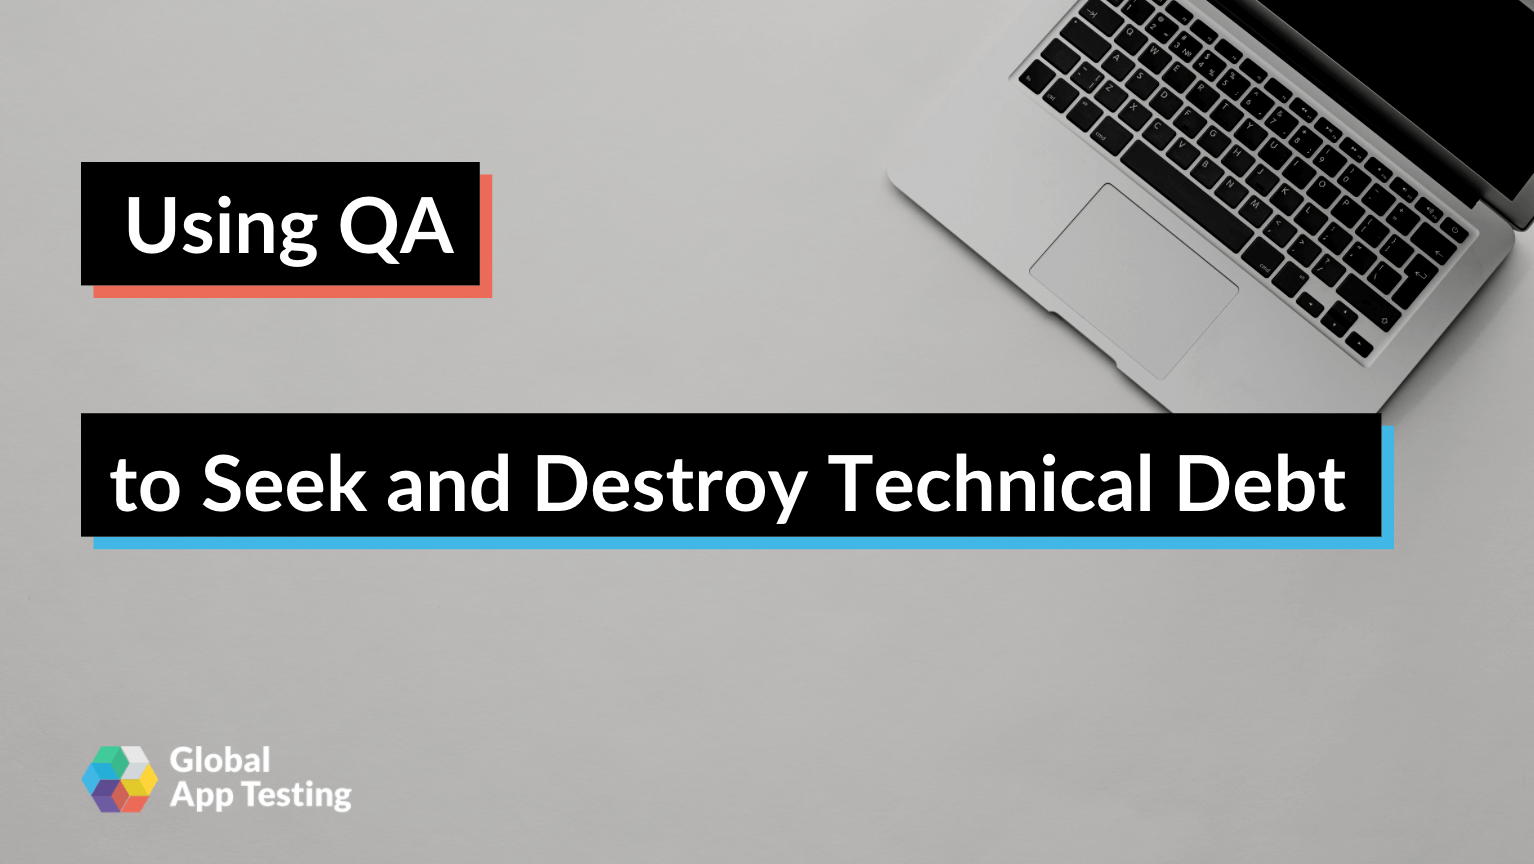 Using QA to Seek and Destroy Technical Debt